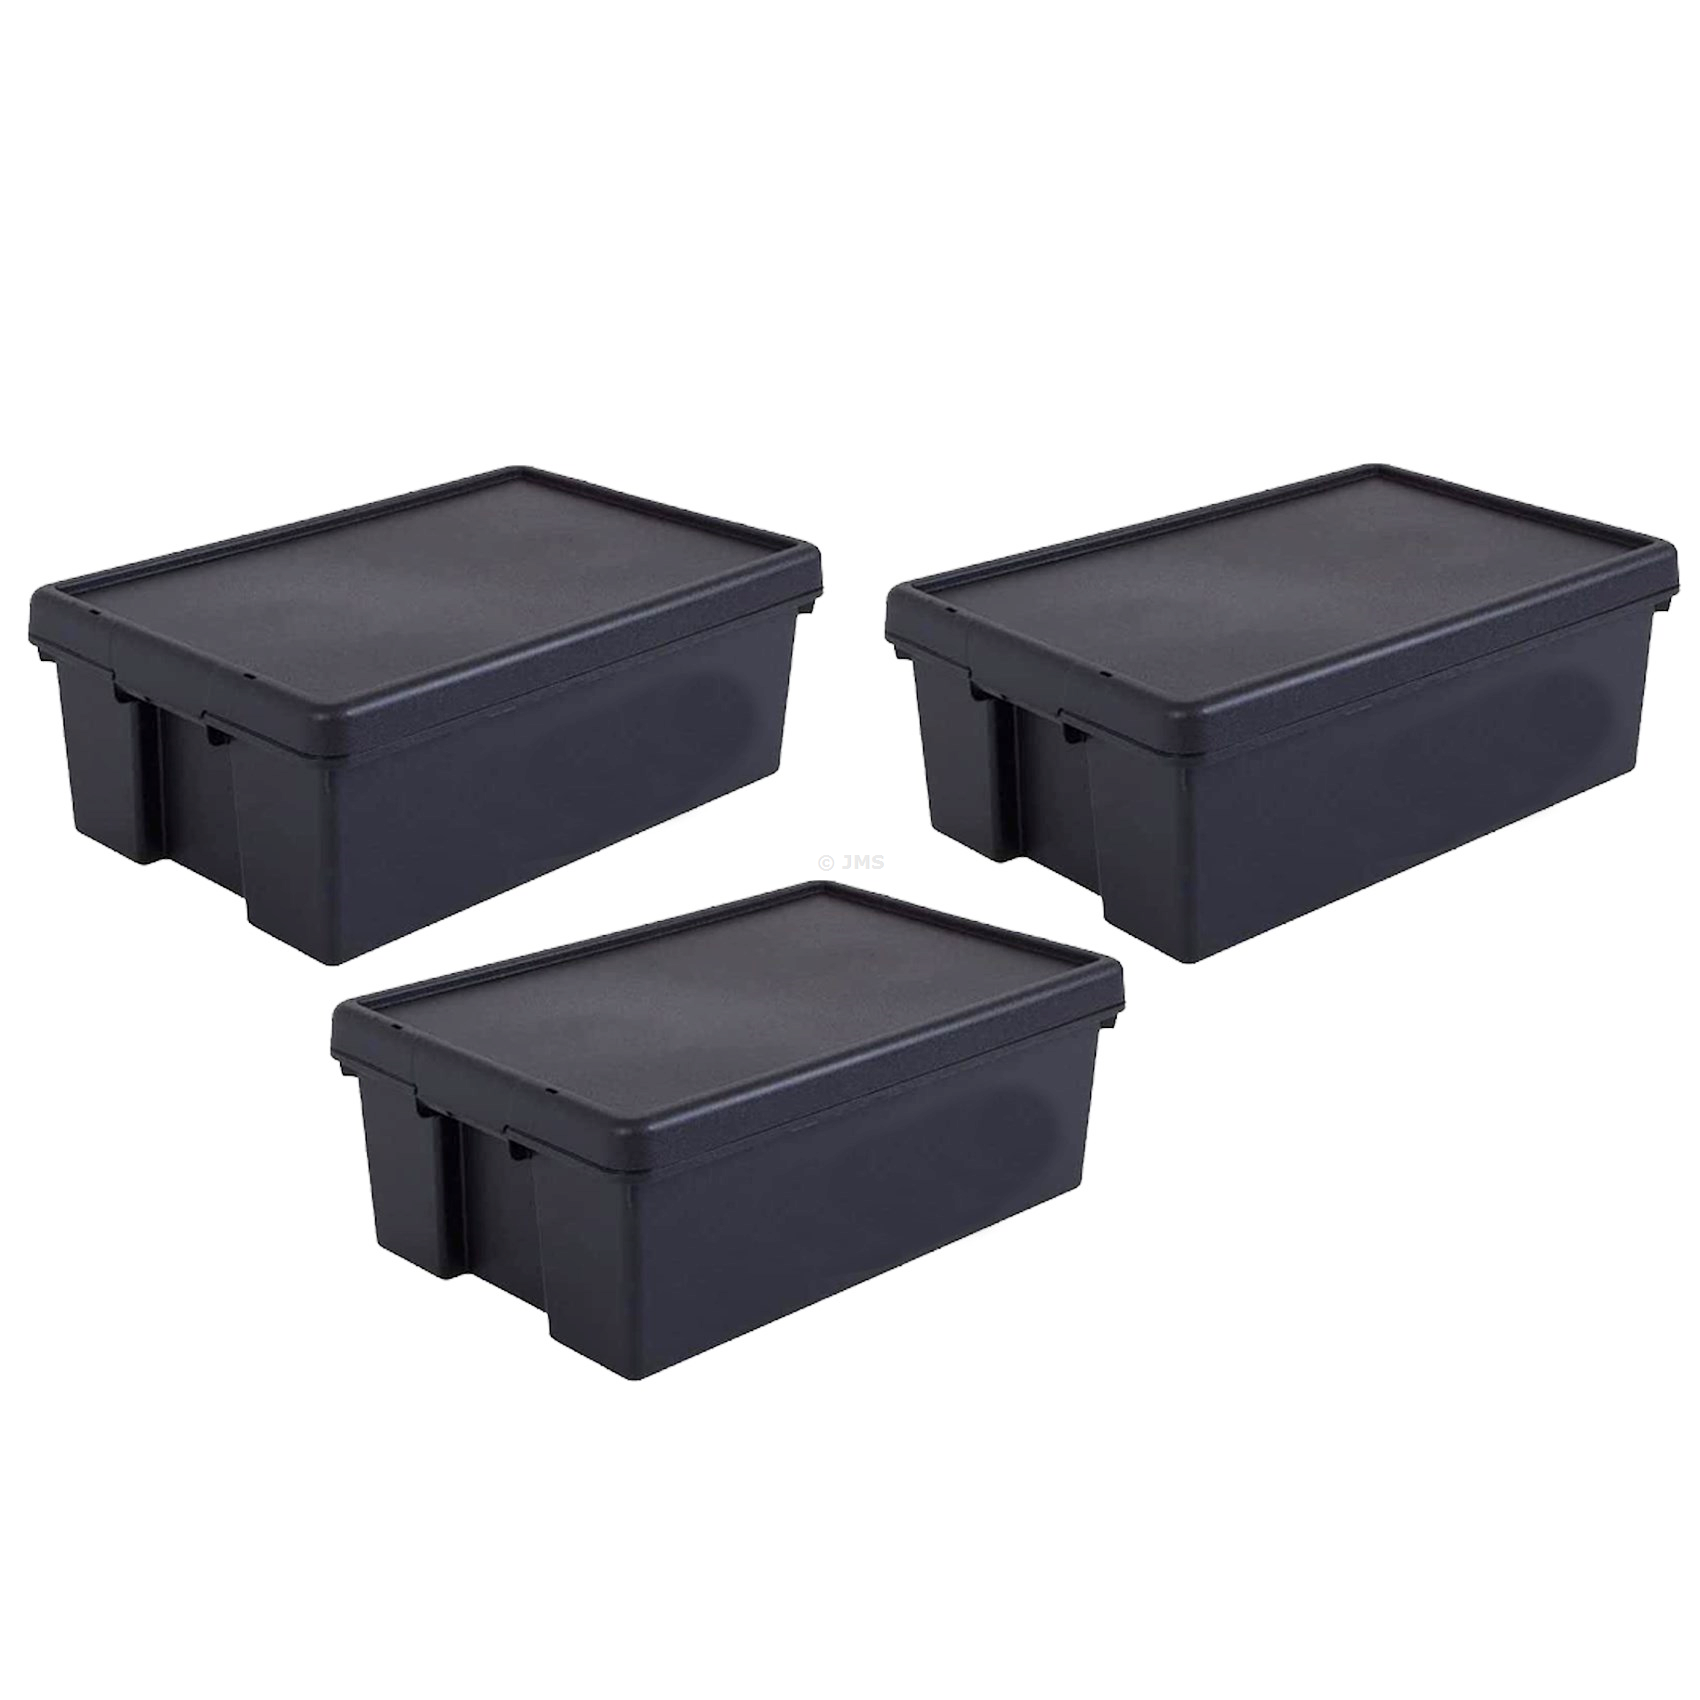 36L Heavy Duty Black Storage Box with Lid, Pack of 3, Recycled Plastic Stackable Nestable Containers Home Office Garage